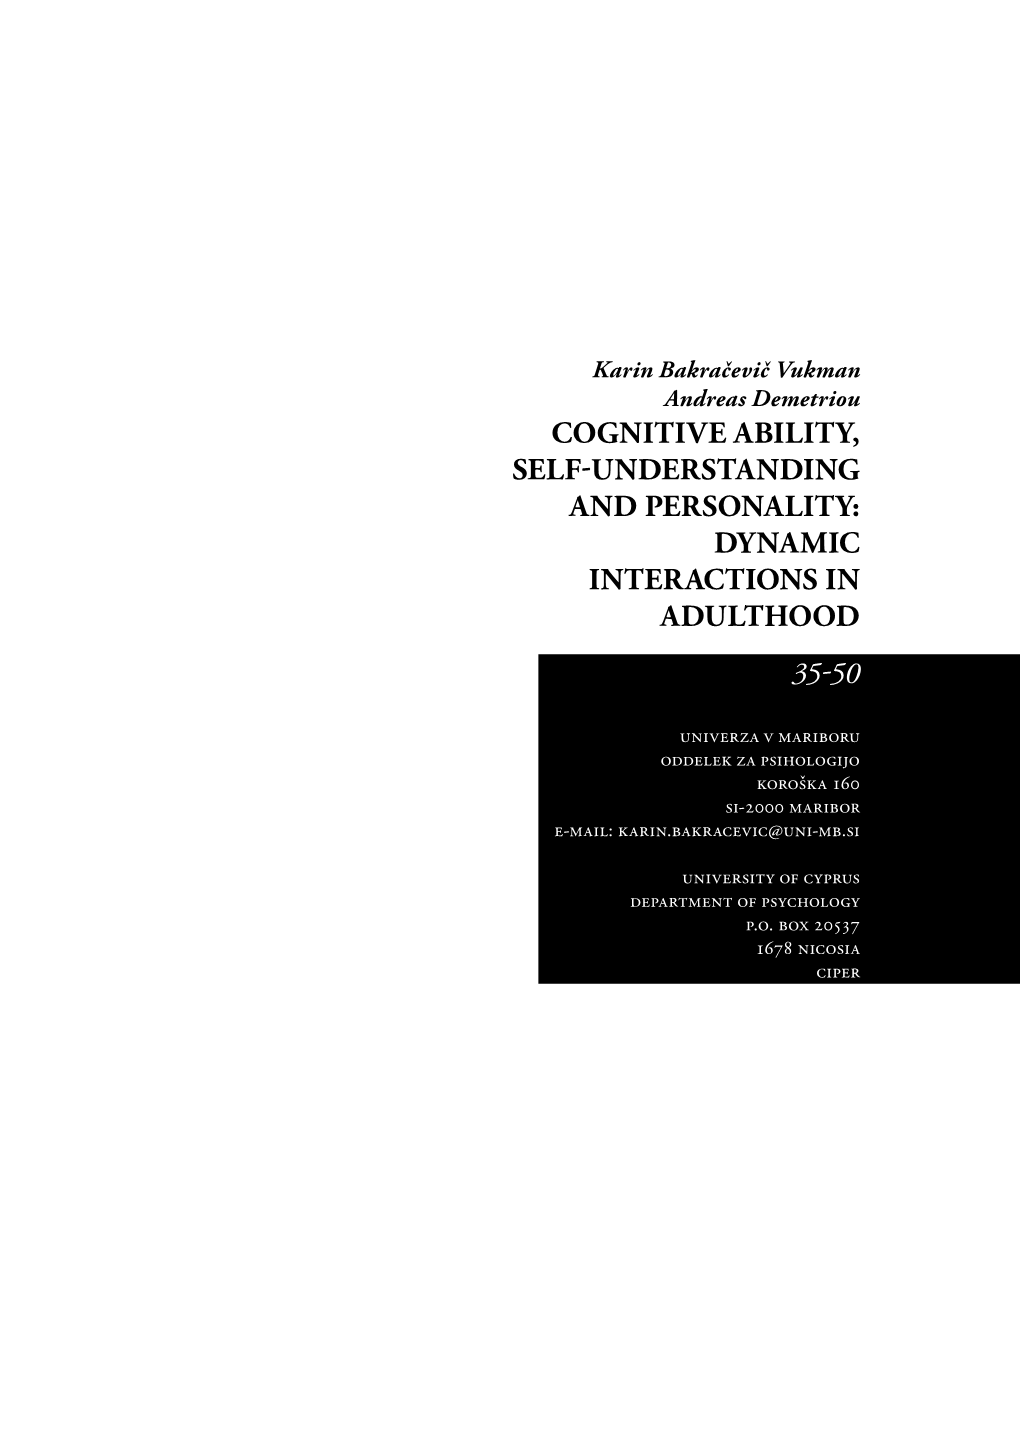 Cognitive Ability, Self-Understanding and Personality: Dynamic Interactions in Adulthood 35-50